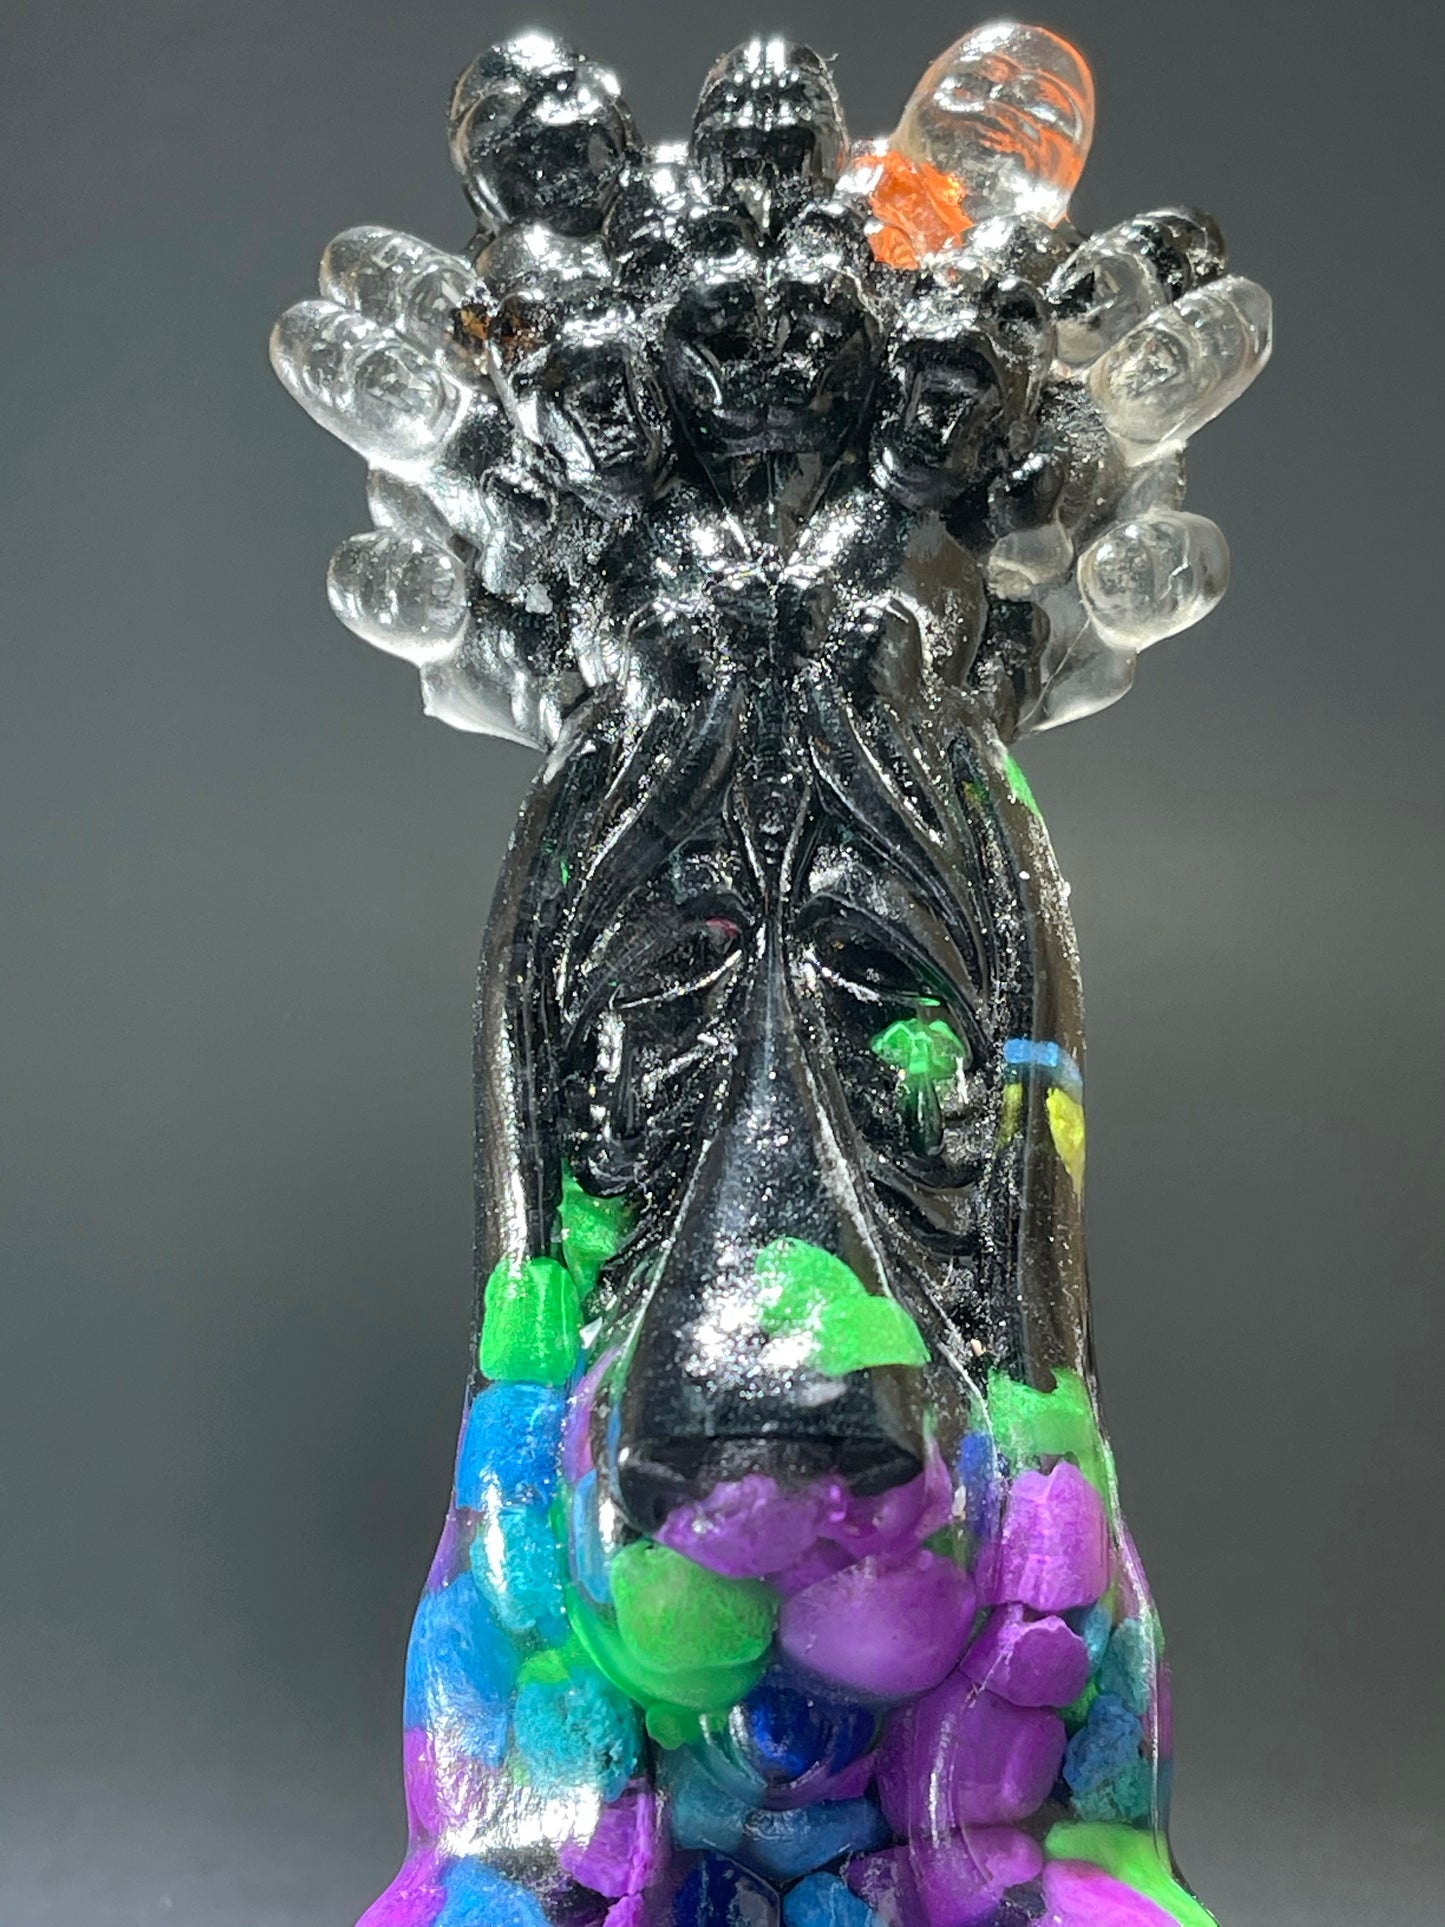 His Majesty the King: Resin Cast with Black and Neon Stones